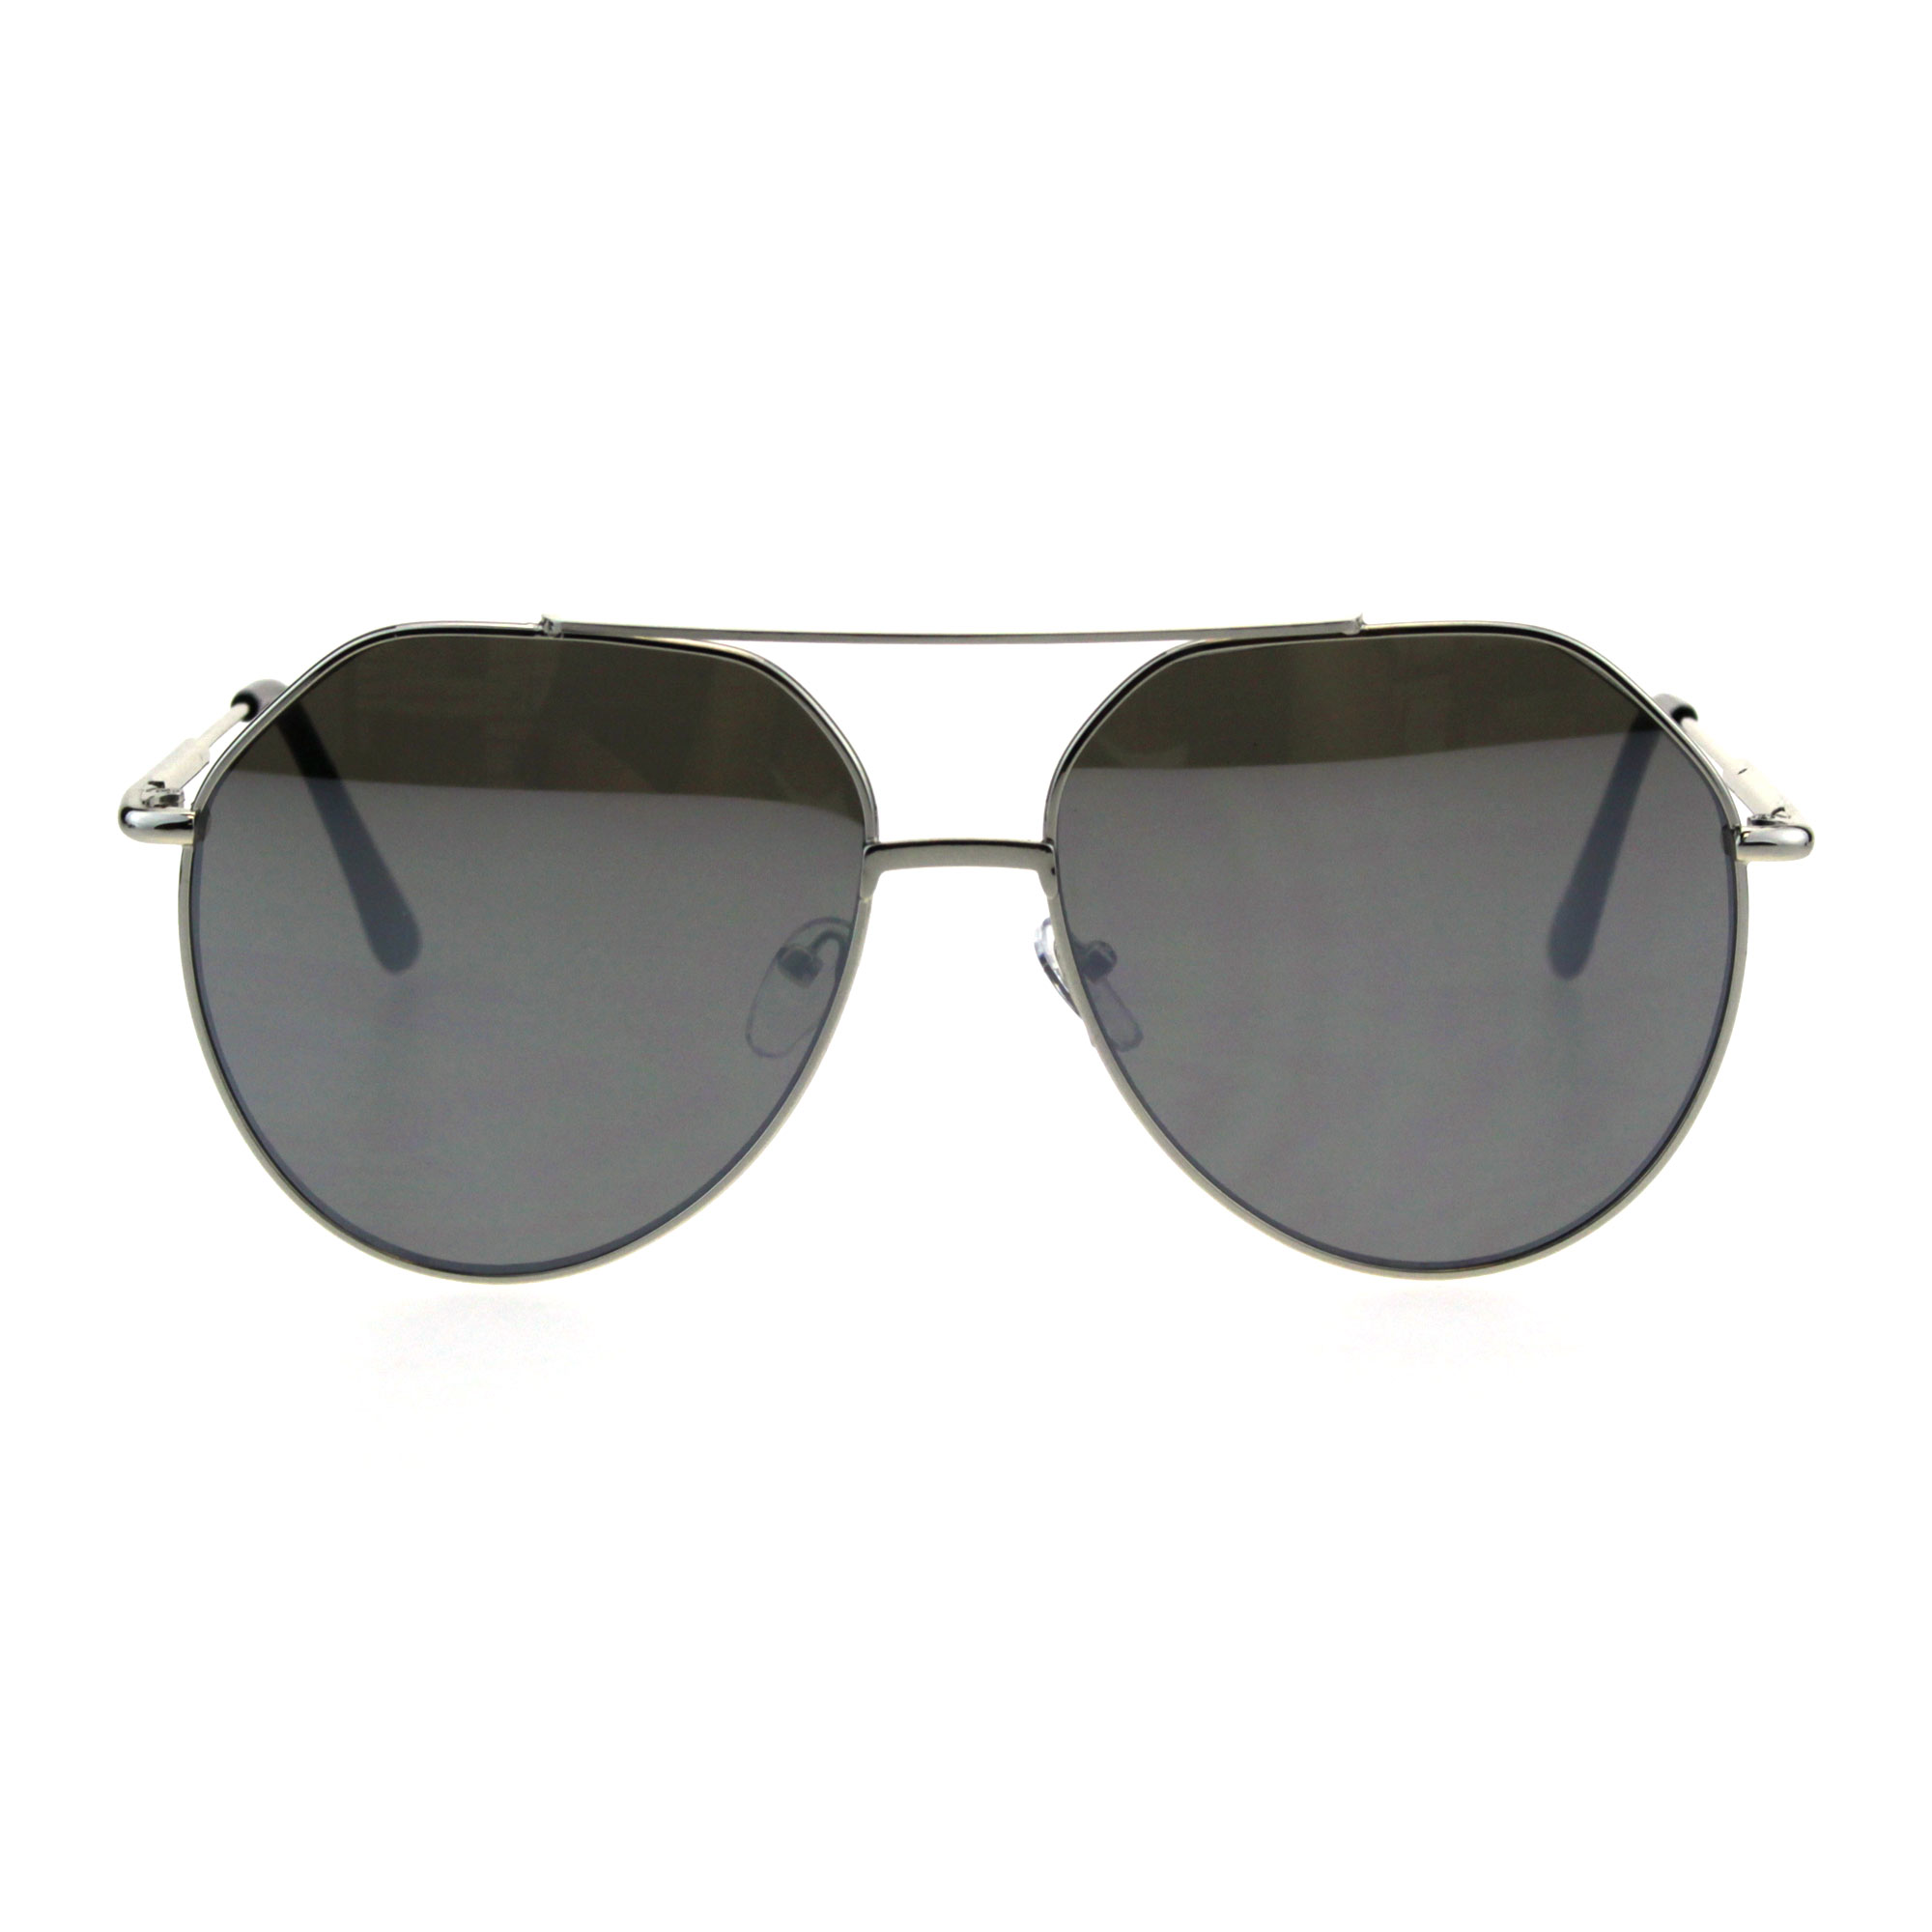 Mens Thin Metal Oversize Vintage Style Pilots Officer Sunglasses Silver Mirror - image 1 of 4